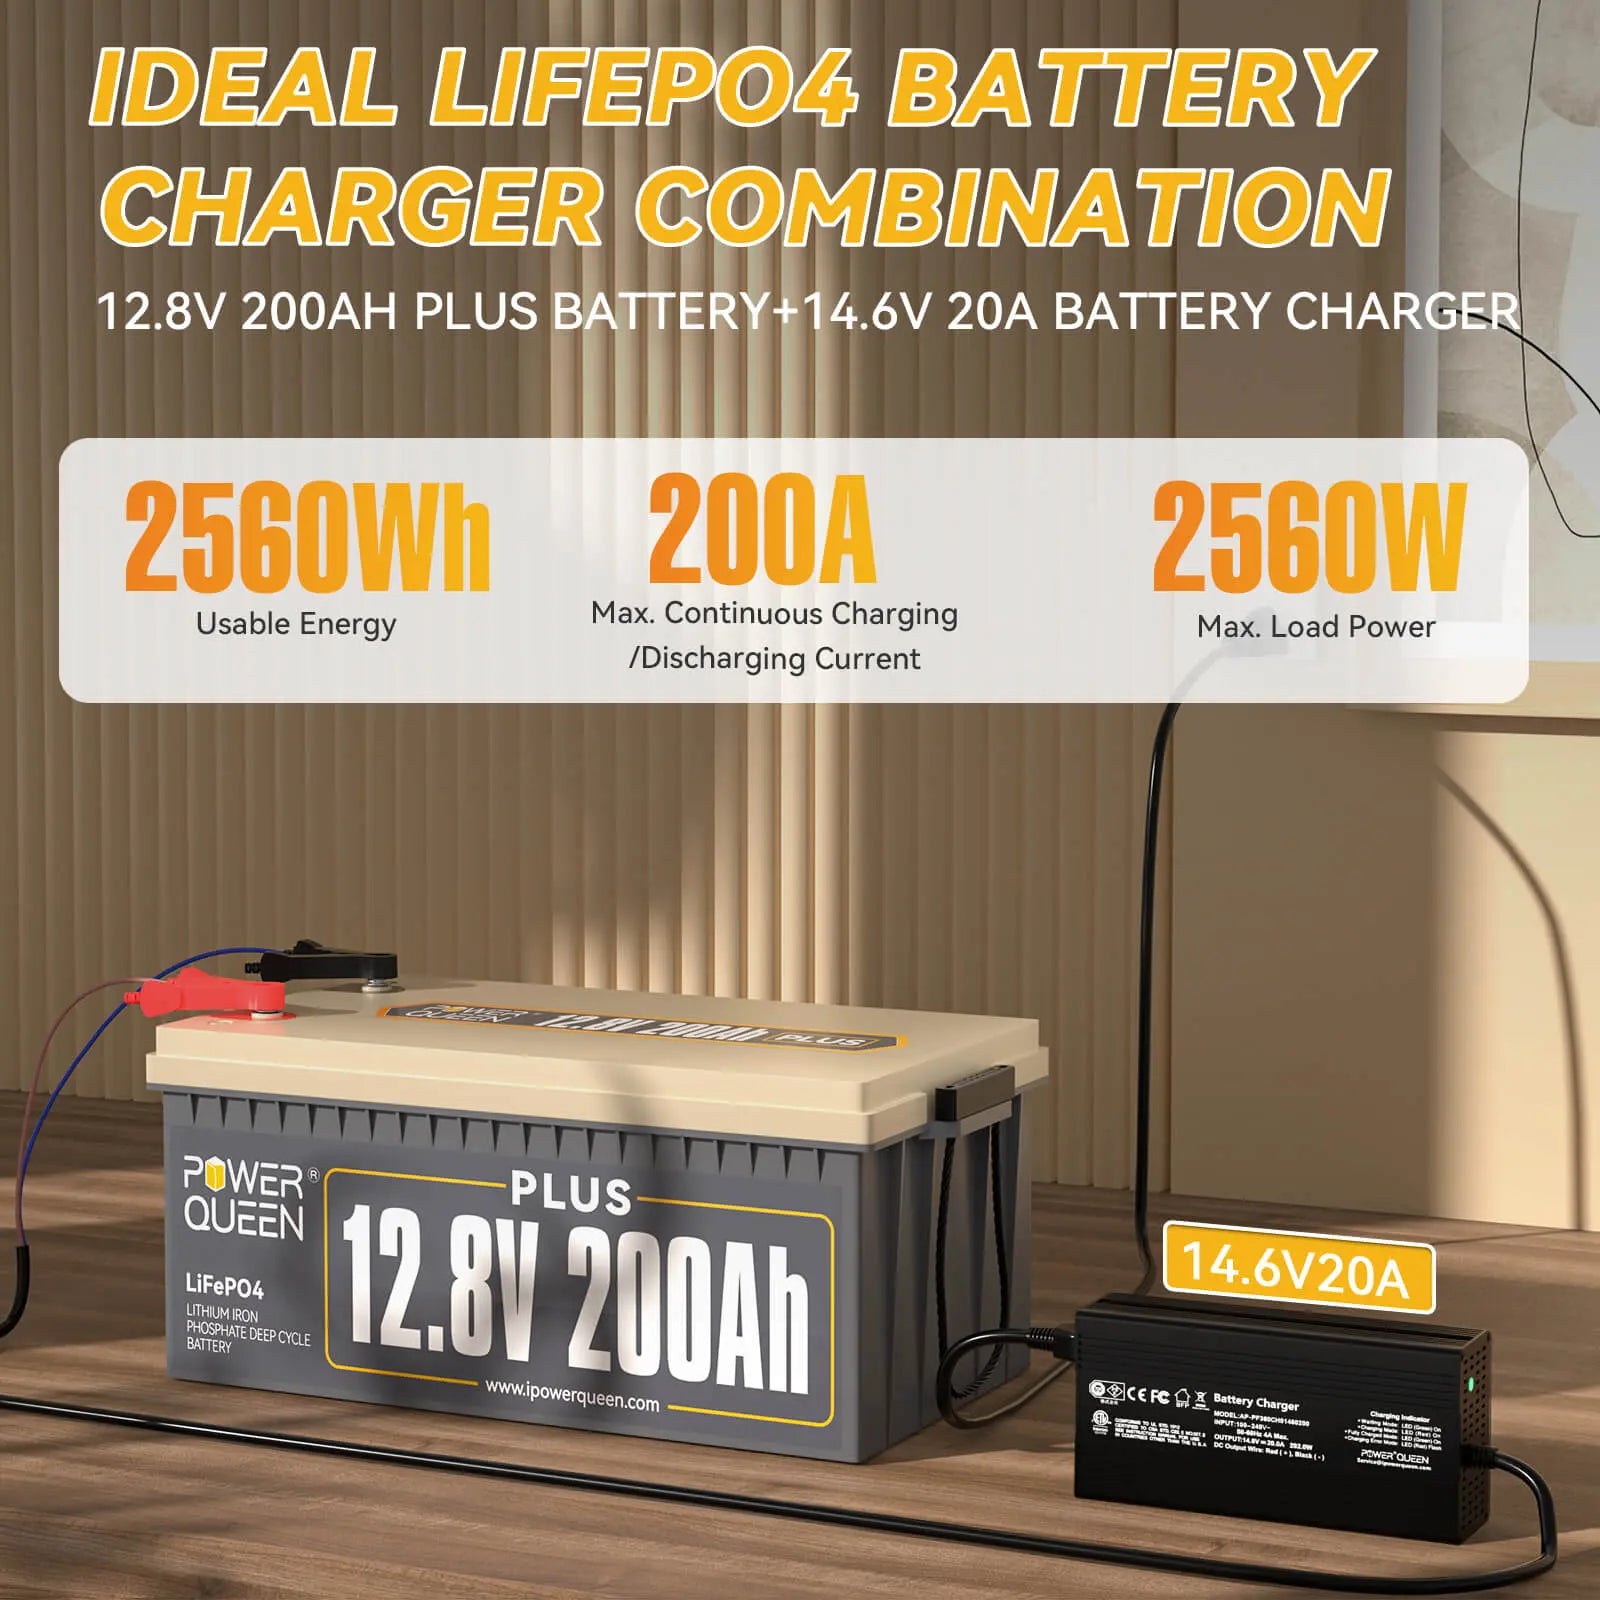 Power Queen 12.8V 200Ah Plus LiFePO4 Battery + 14.6V 20A Charger